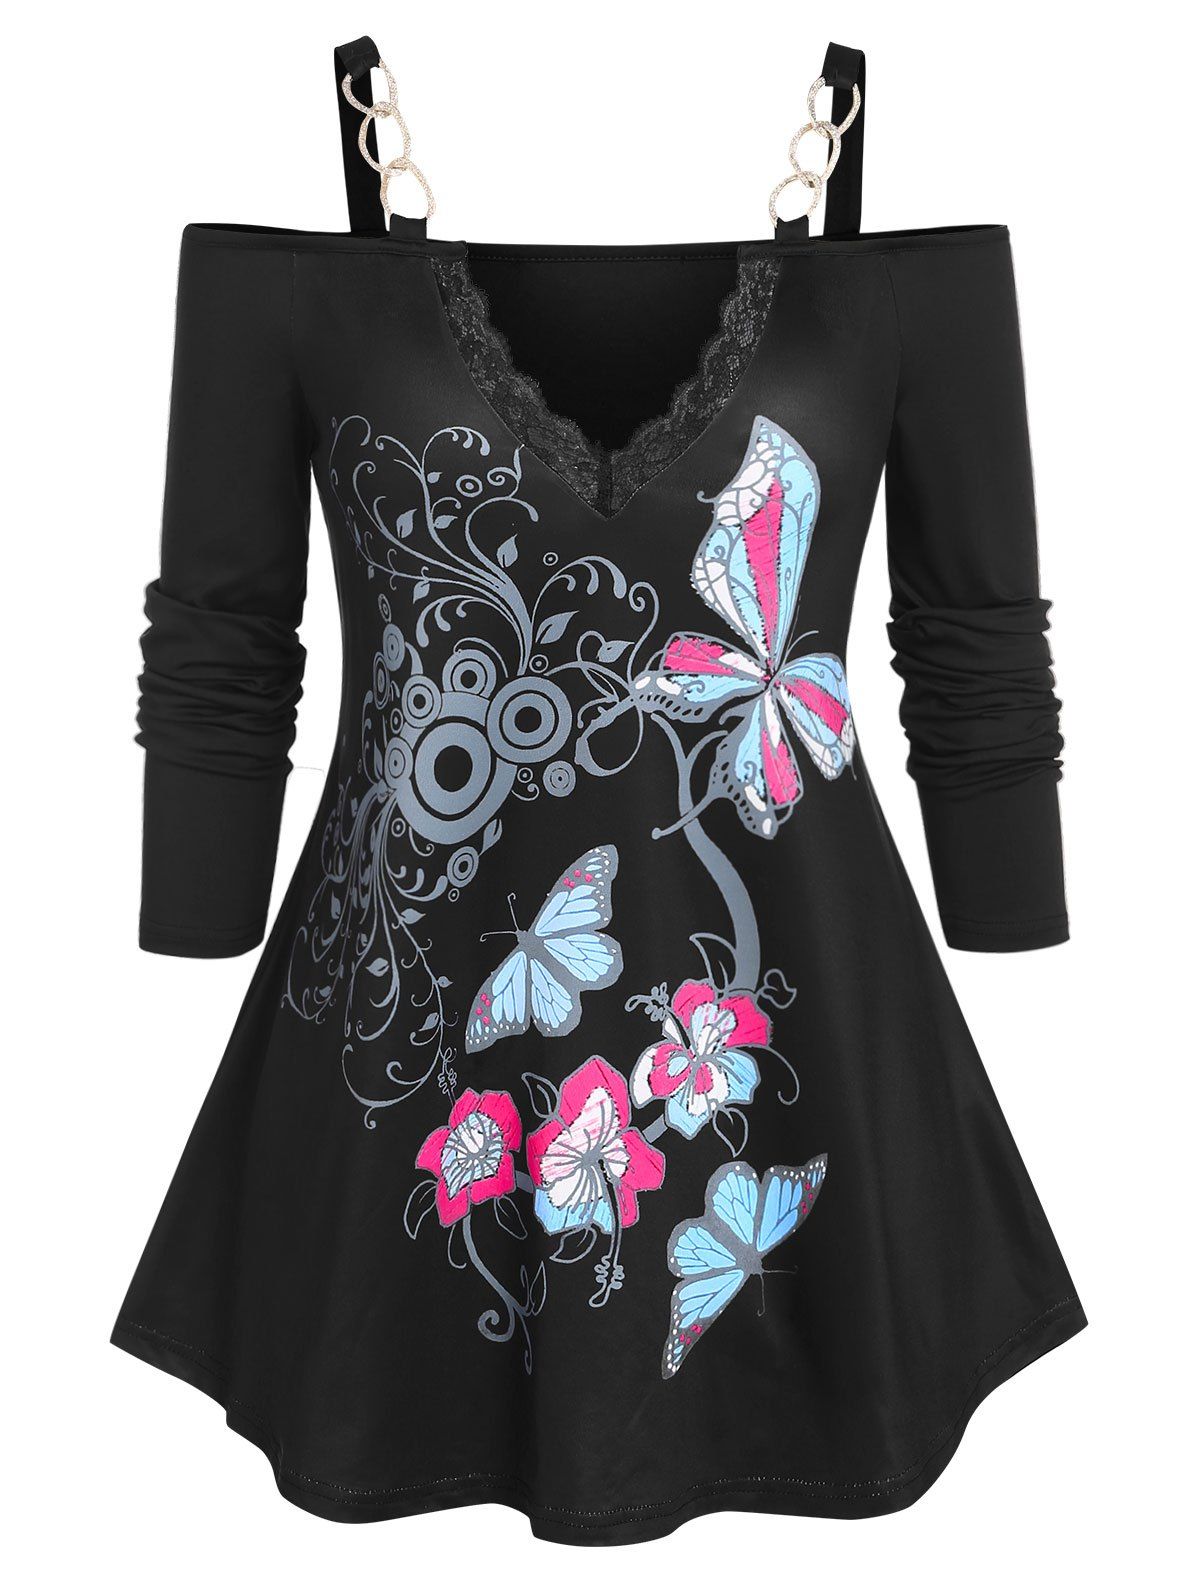 Plus Size Cold Shoulder Chains Butterfly Print Tee - BLACK L